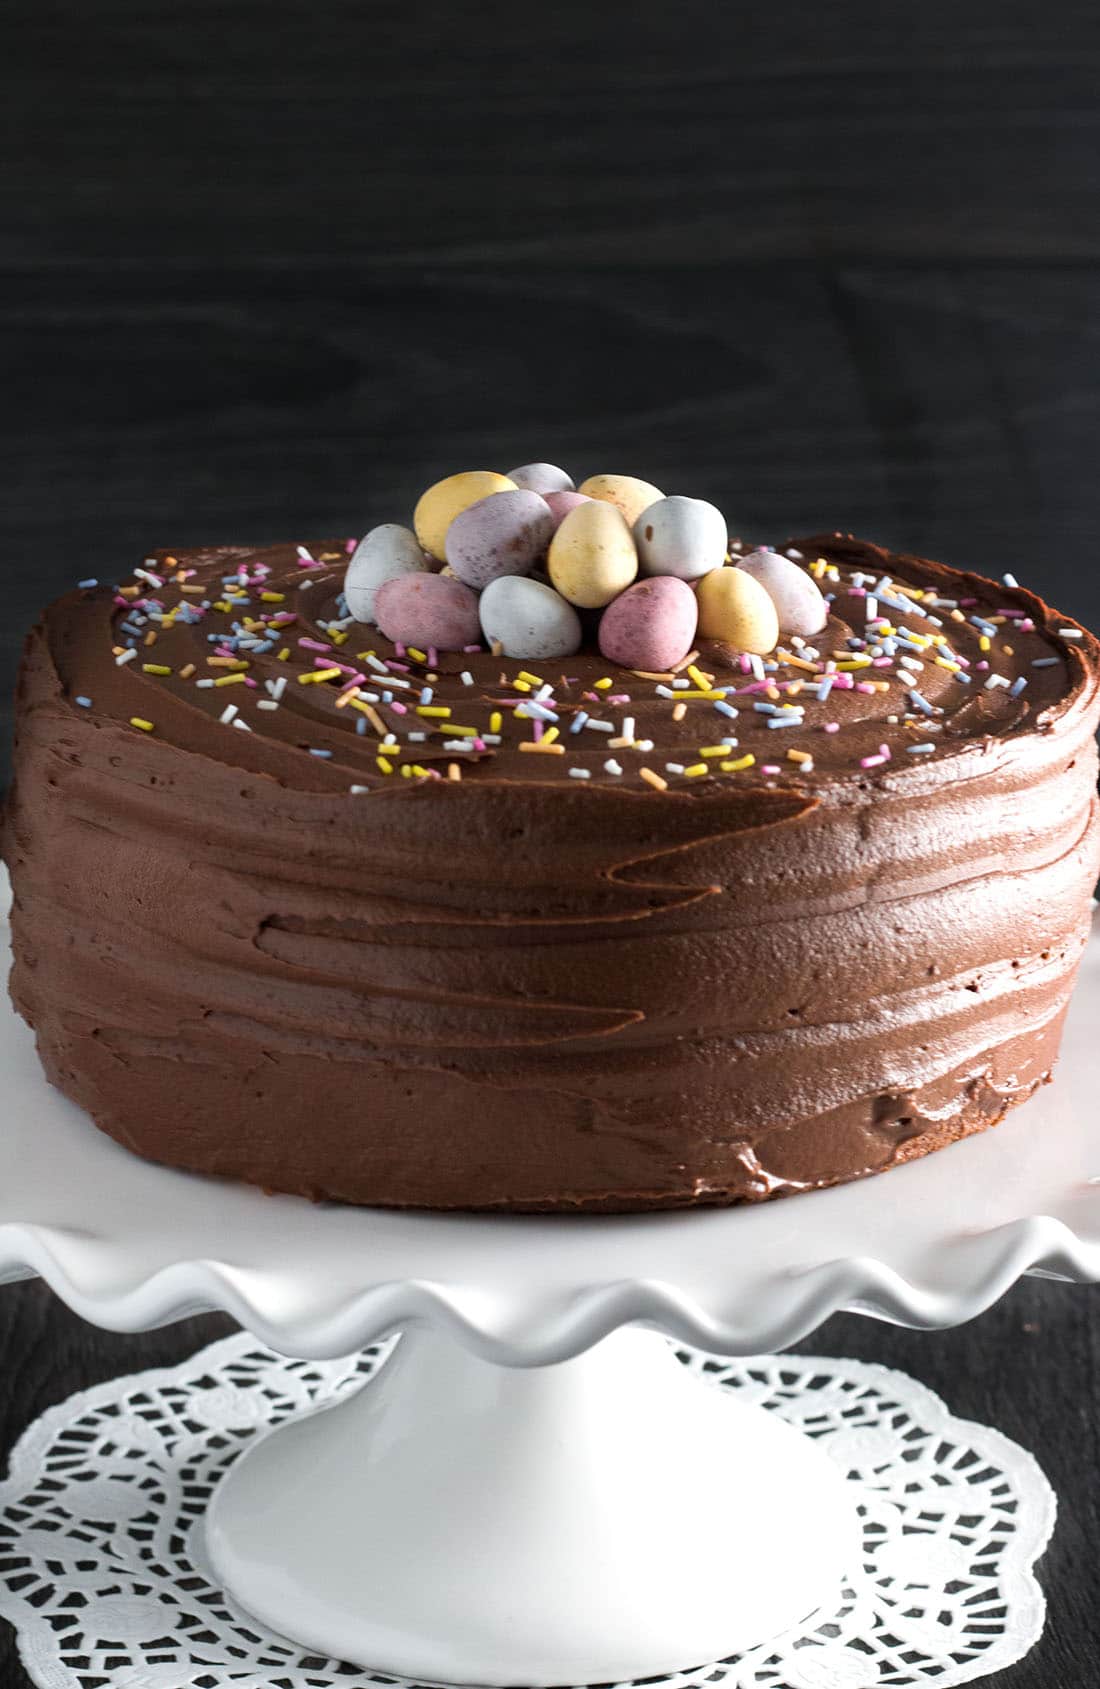 Yellow celebration cake with chocolate frosting on a serving dish topped with chocolate eggs